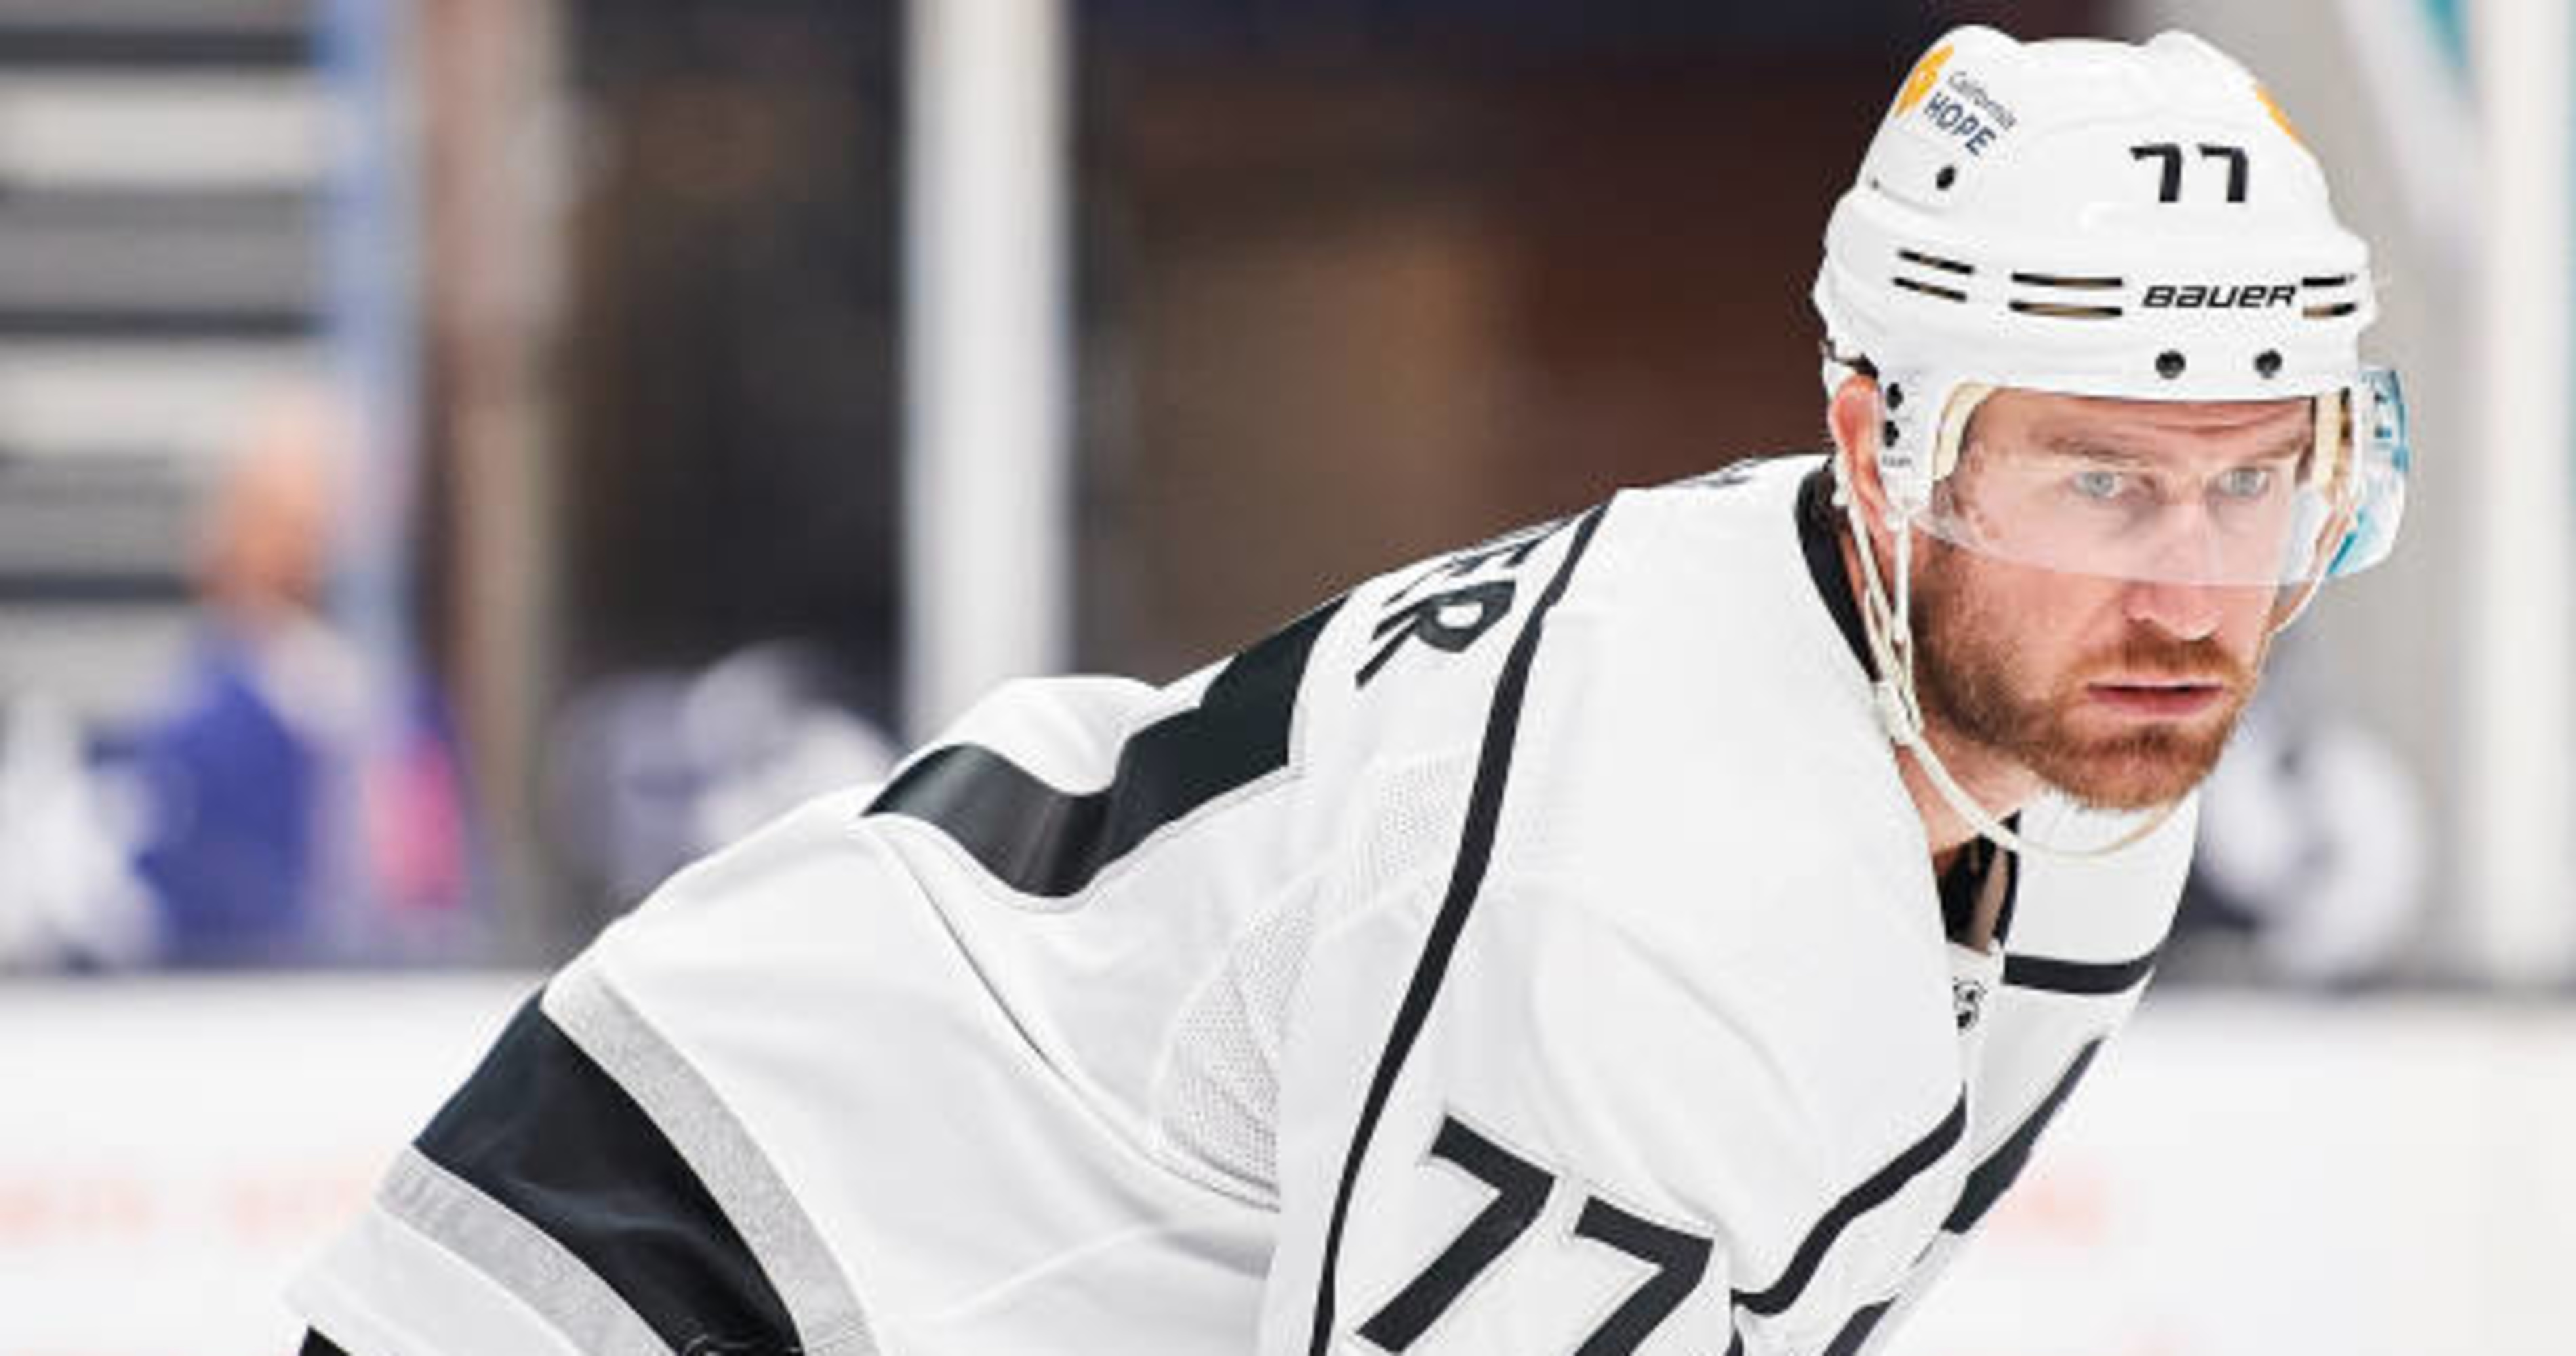 Kings trade Jeff Carter, who helped team win 2 Stanley Cups, to Penguins  for pair of draft picks